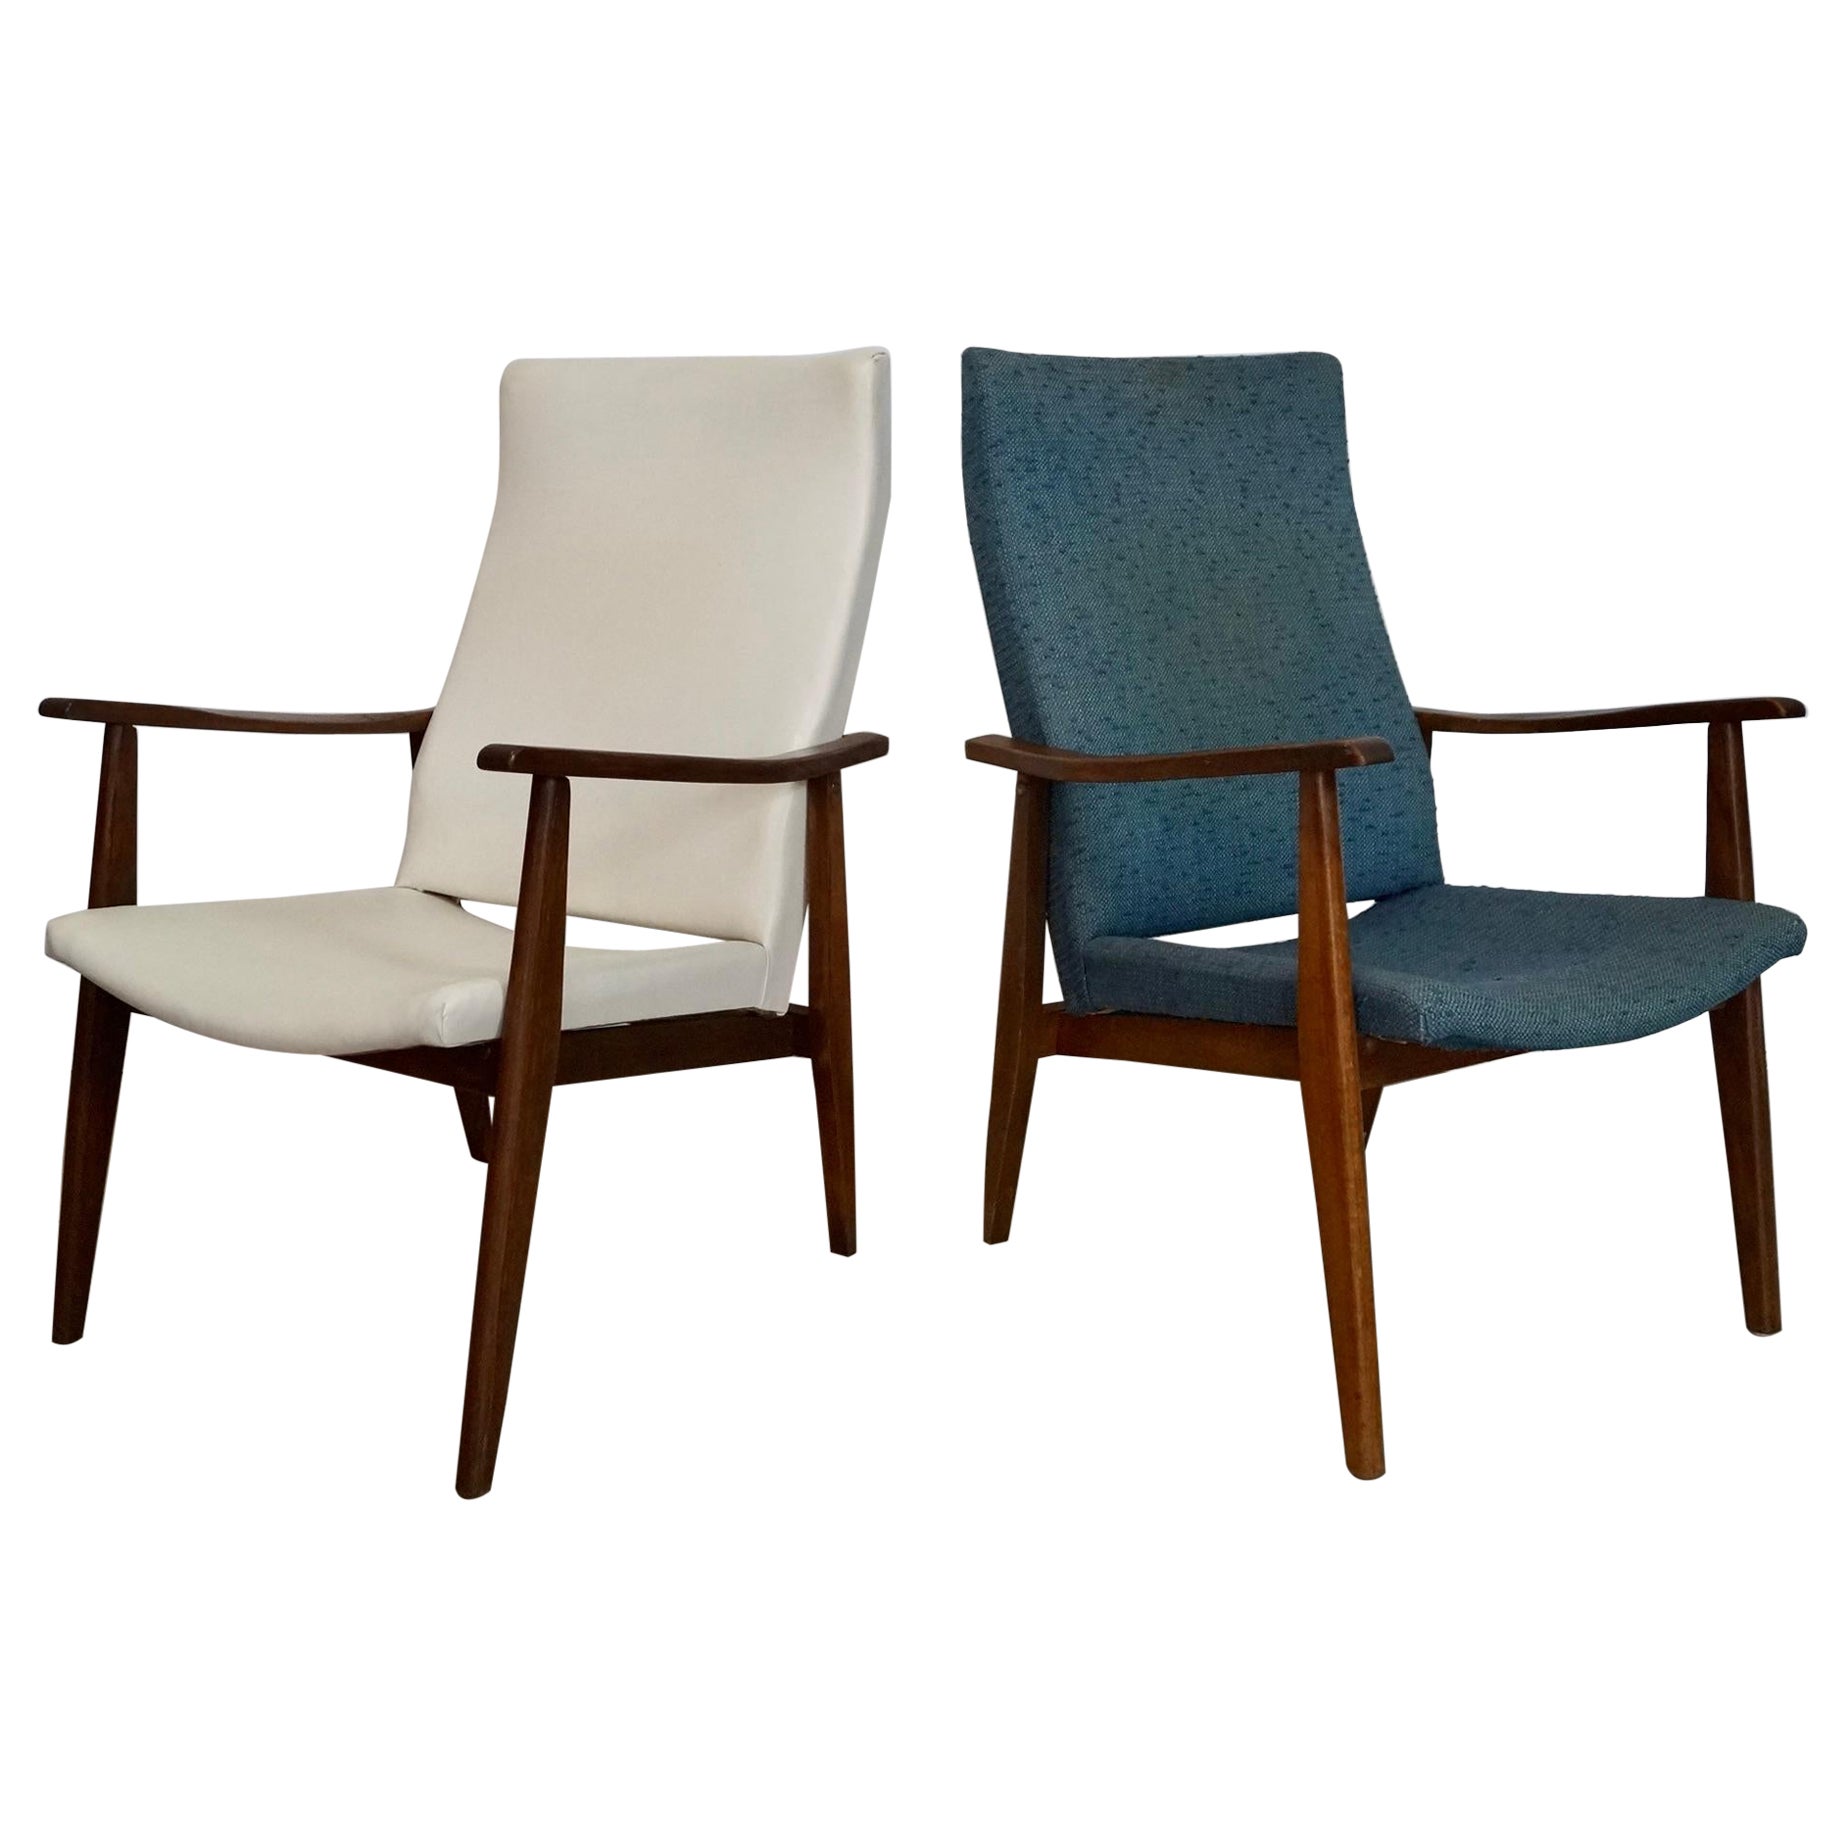 1960's Mid-Century Modern Lounge Armchairs - a Pair For Sale